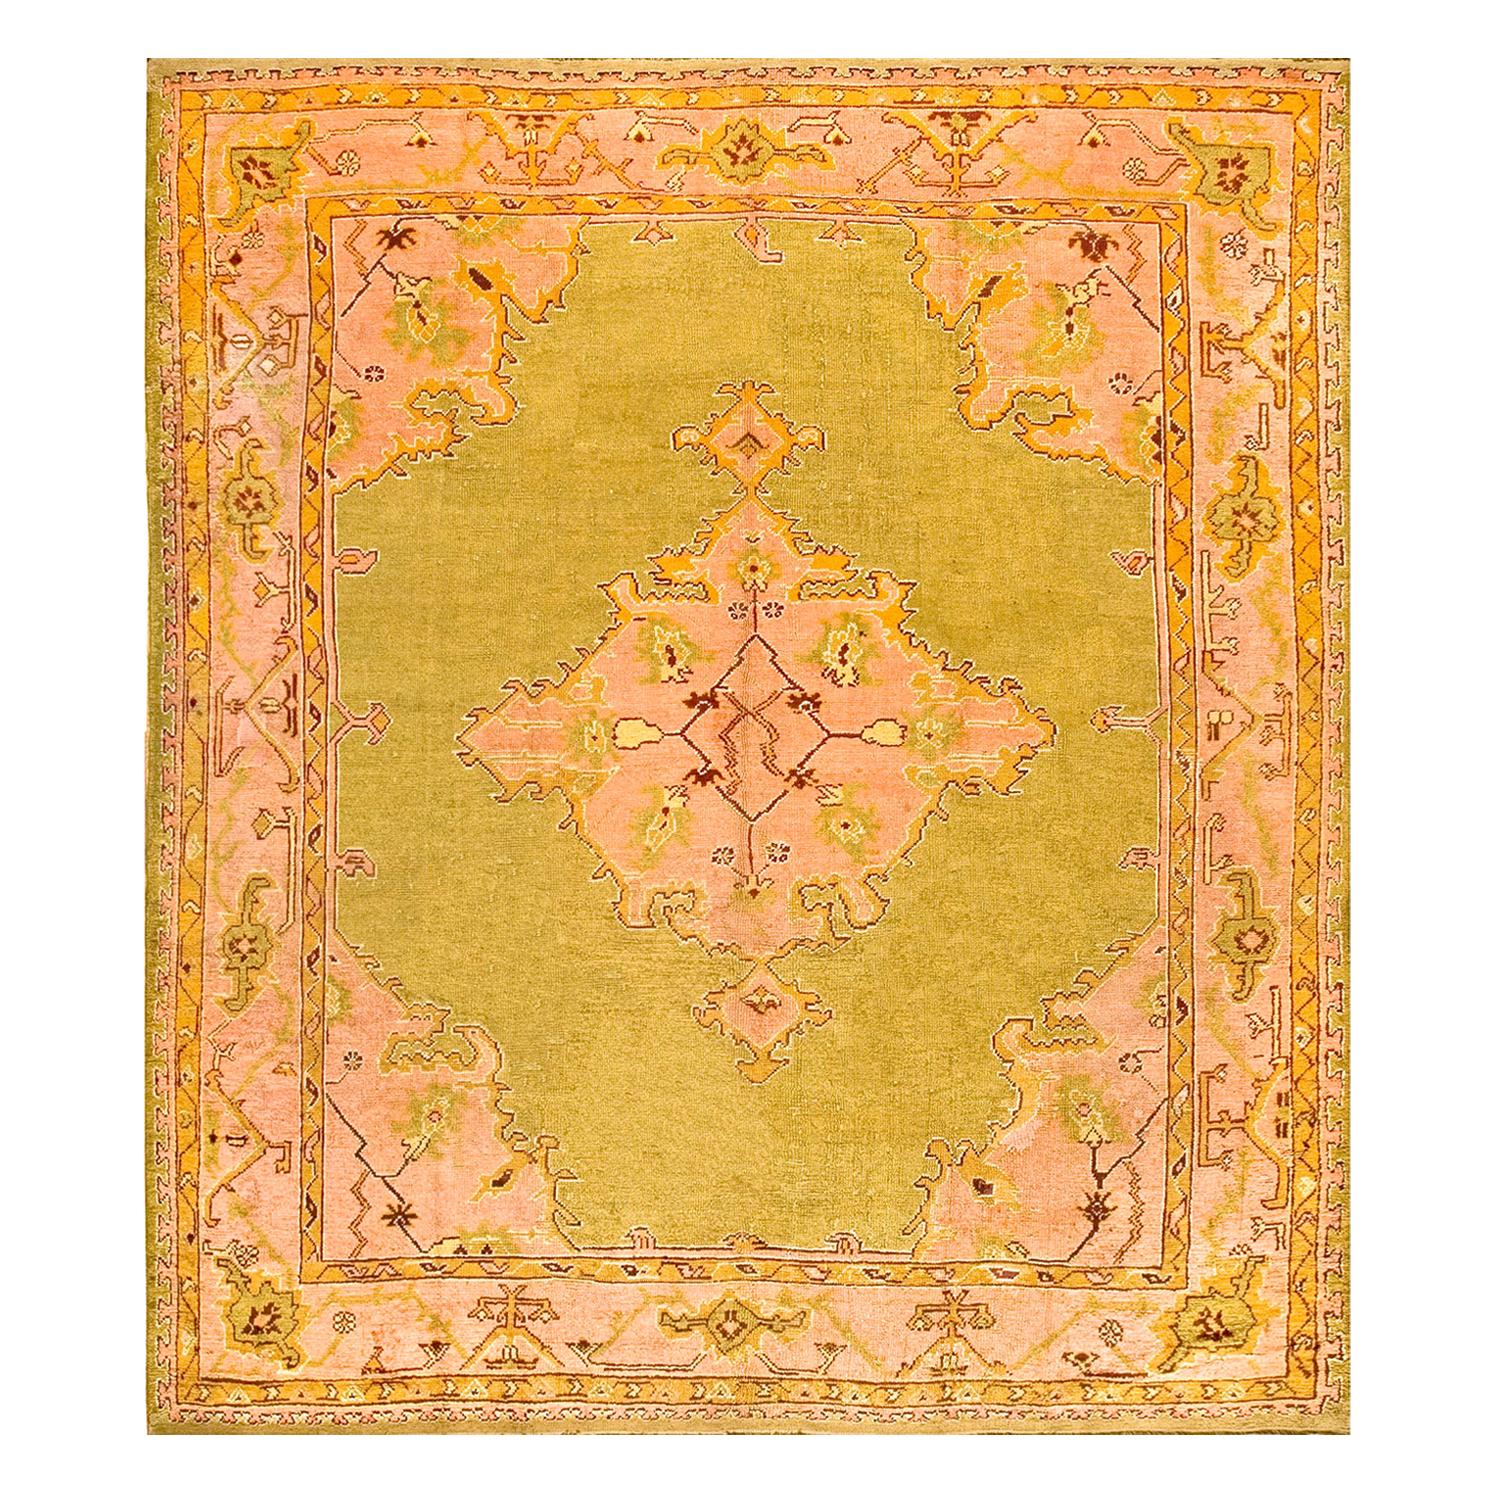 Early 20th Century Turkish Oushak Carpet ( 10'8" x 11'10" - 325 x 360 ) For Sale